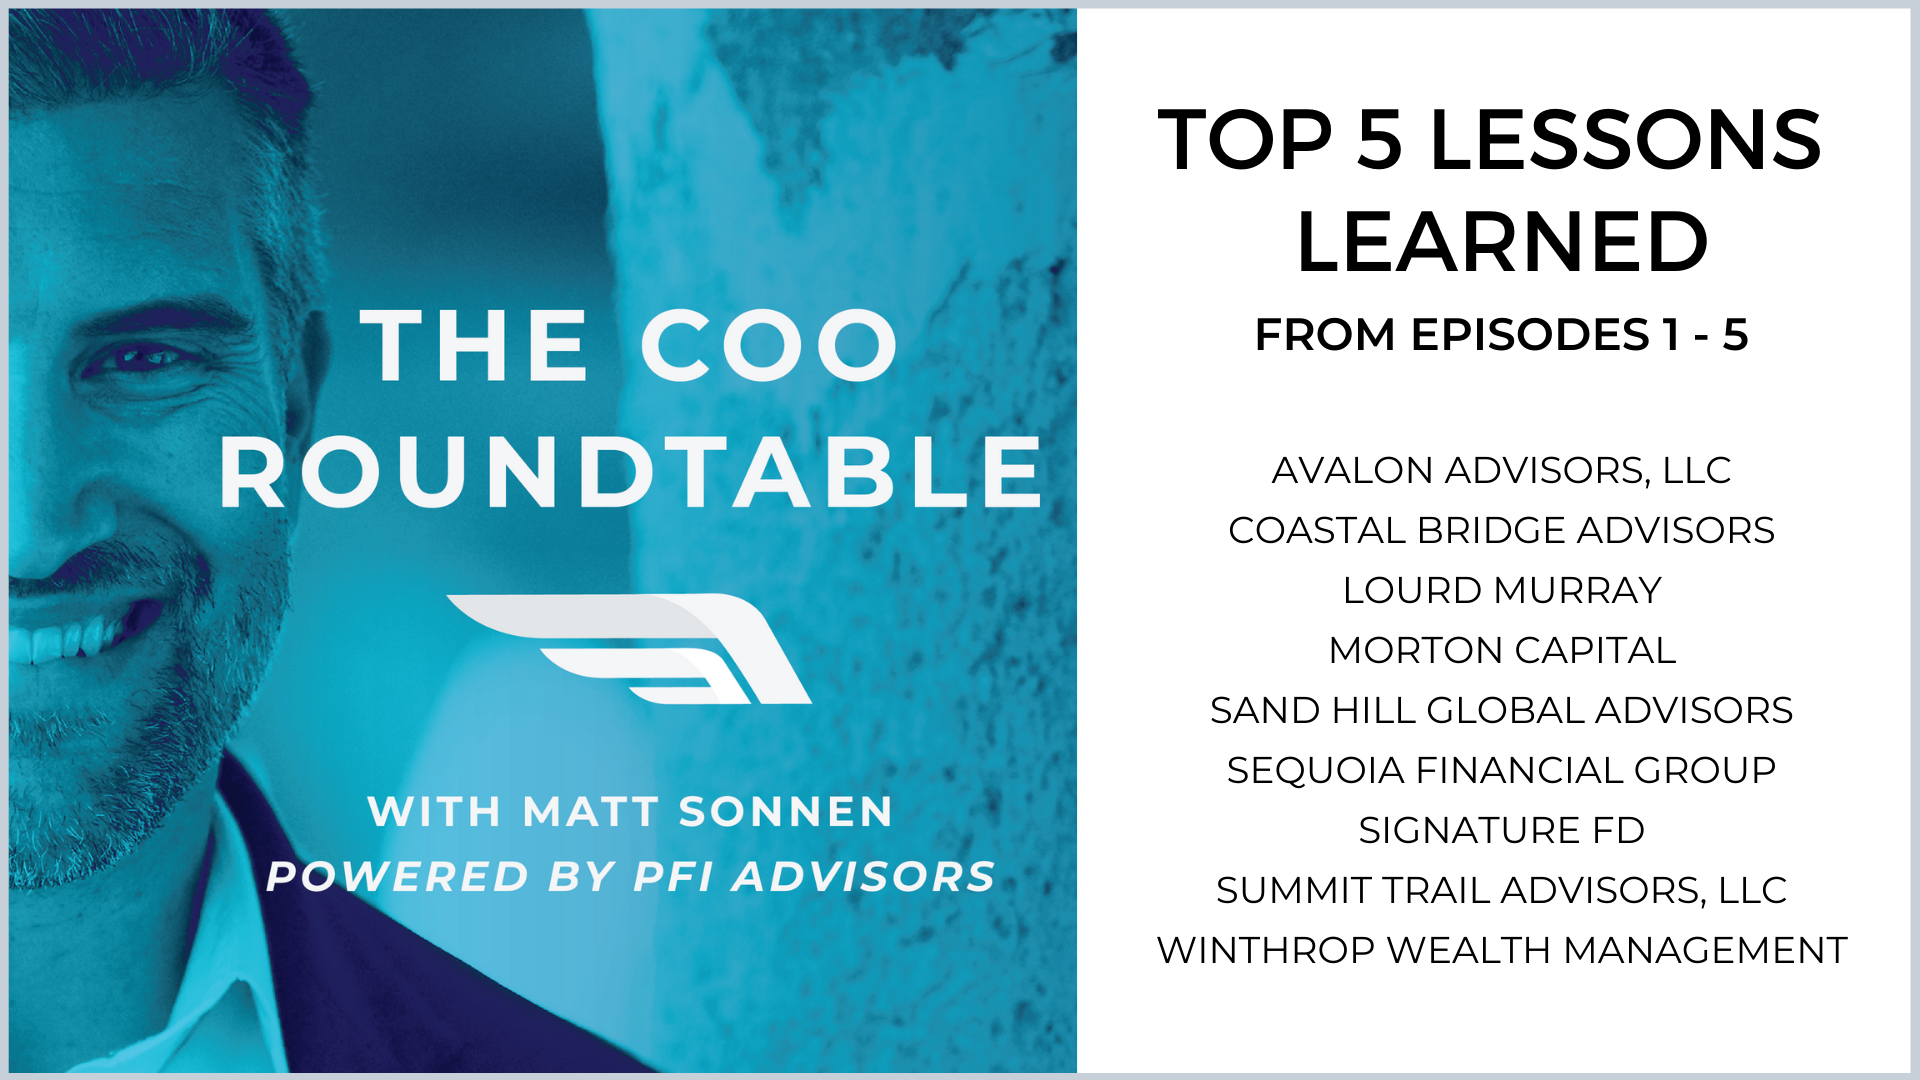 Top 5 Lessons Learned from Episodes 1-5 of The COO Roundtable